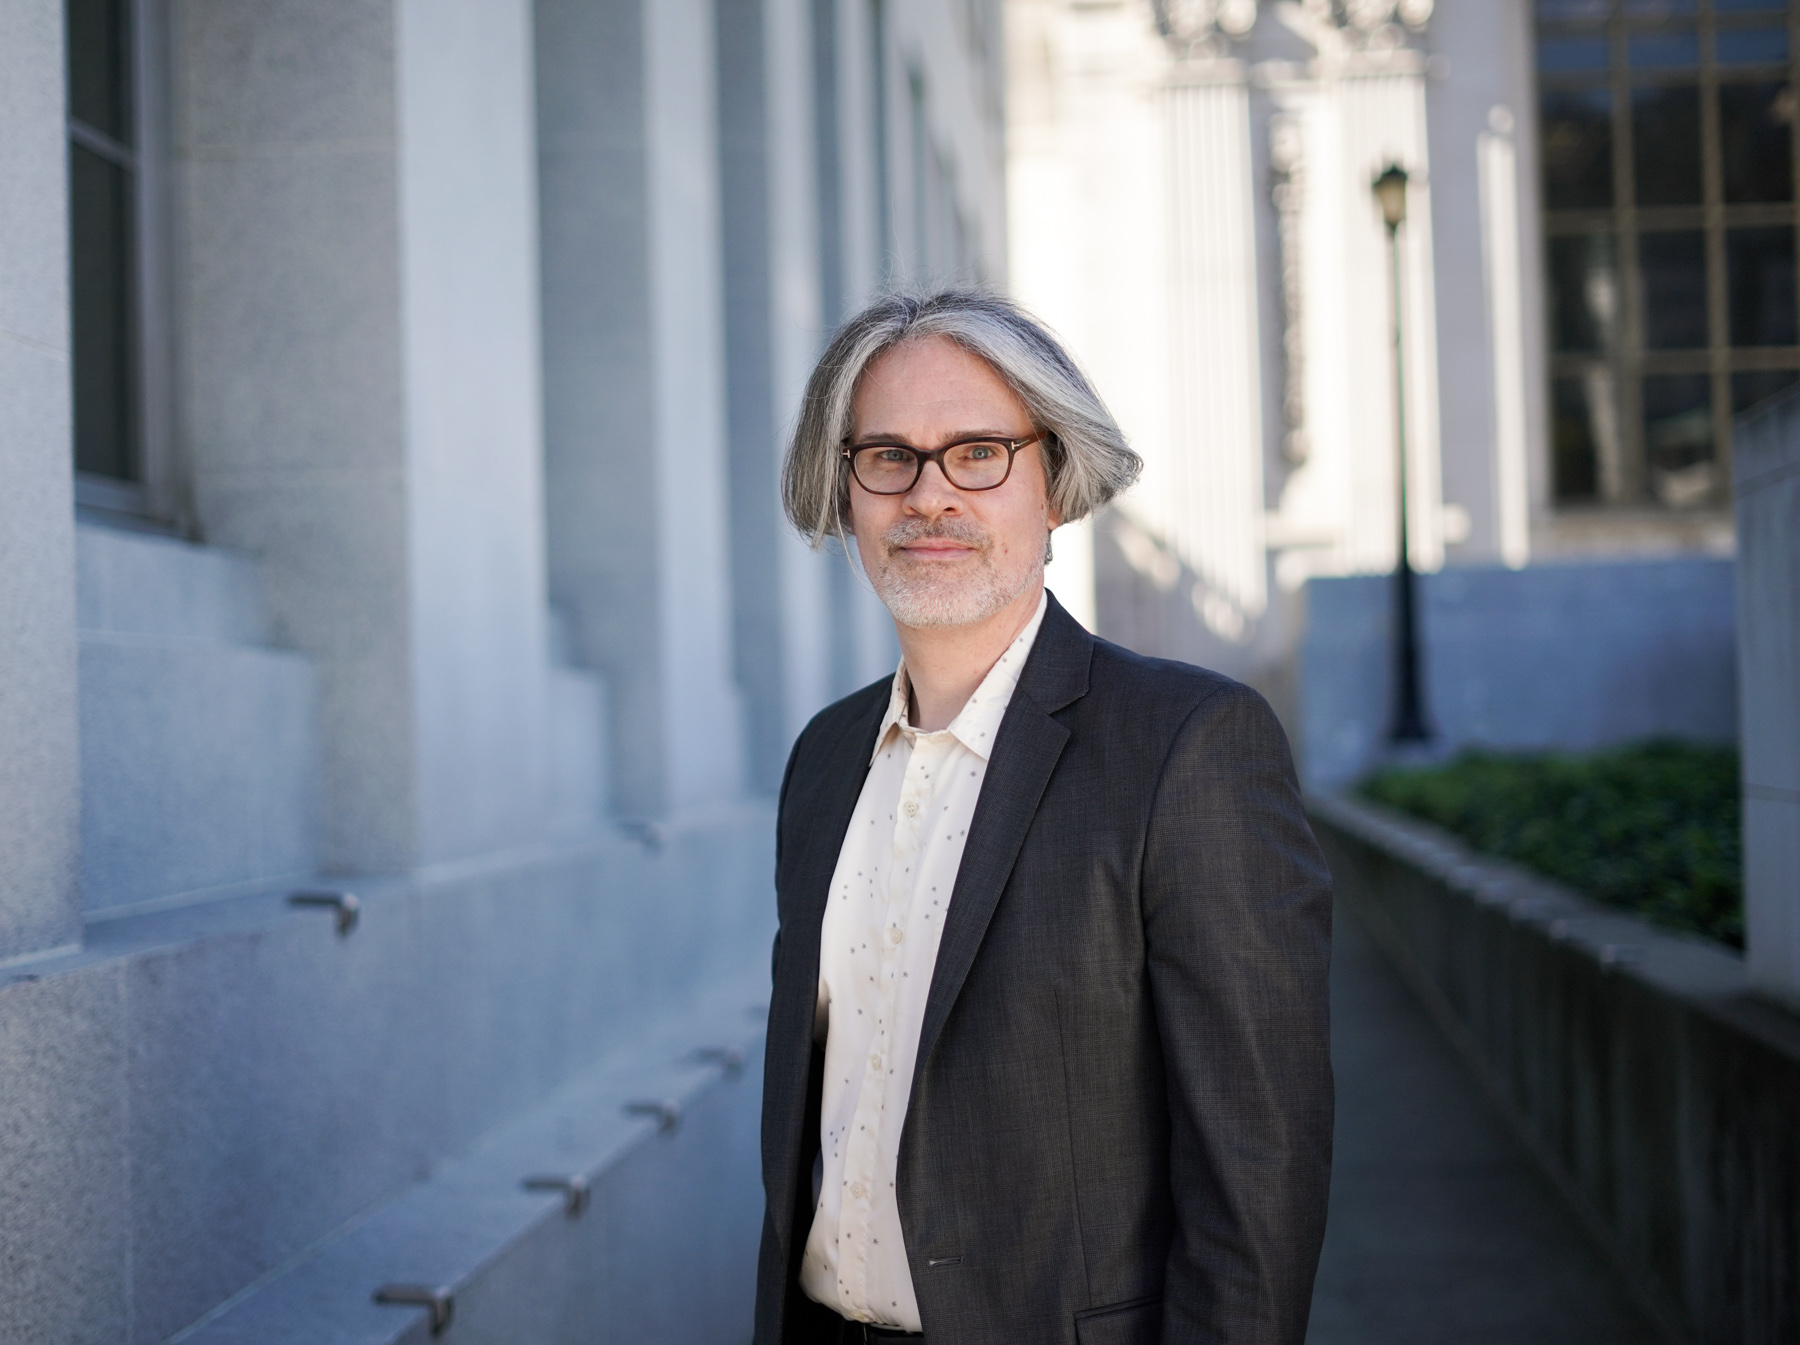 Paul Burnett, a historian at the Oral History Center in The Bancroft Library, poses for a portrait outside The Bancroft Library on March 5, 2018. (Photo by Jami Smith for the UC Berkeley Library)